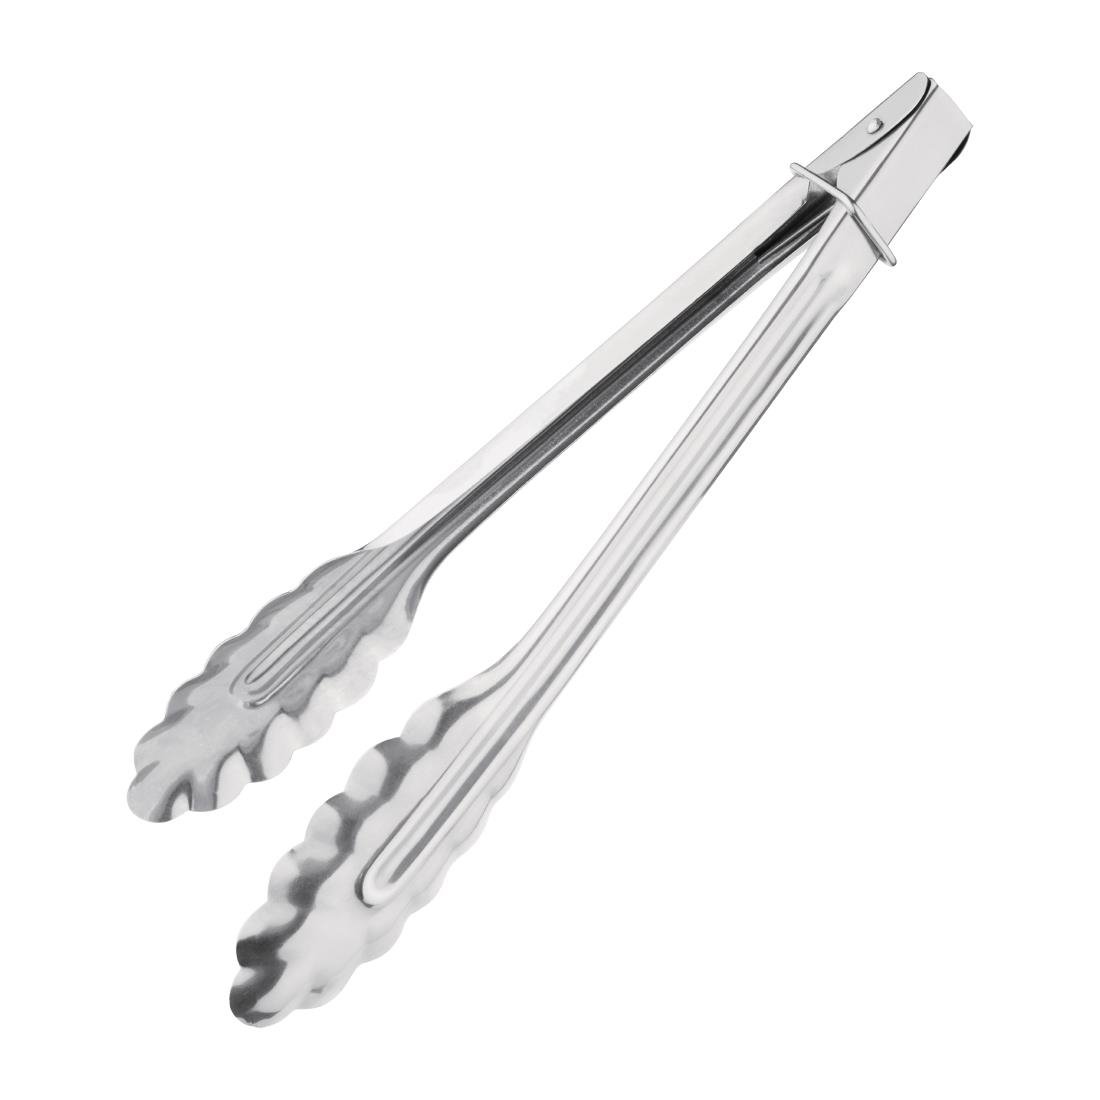 Nisbets Essentials Catering Tongs 245mm - Catering products, Equipment ...